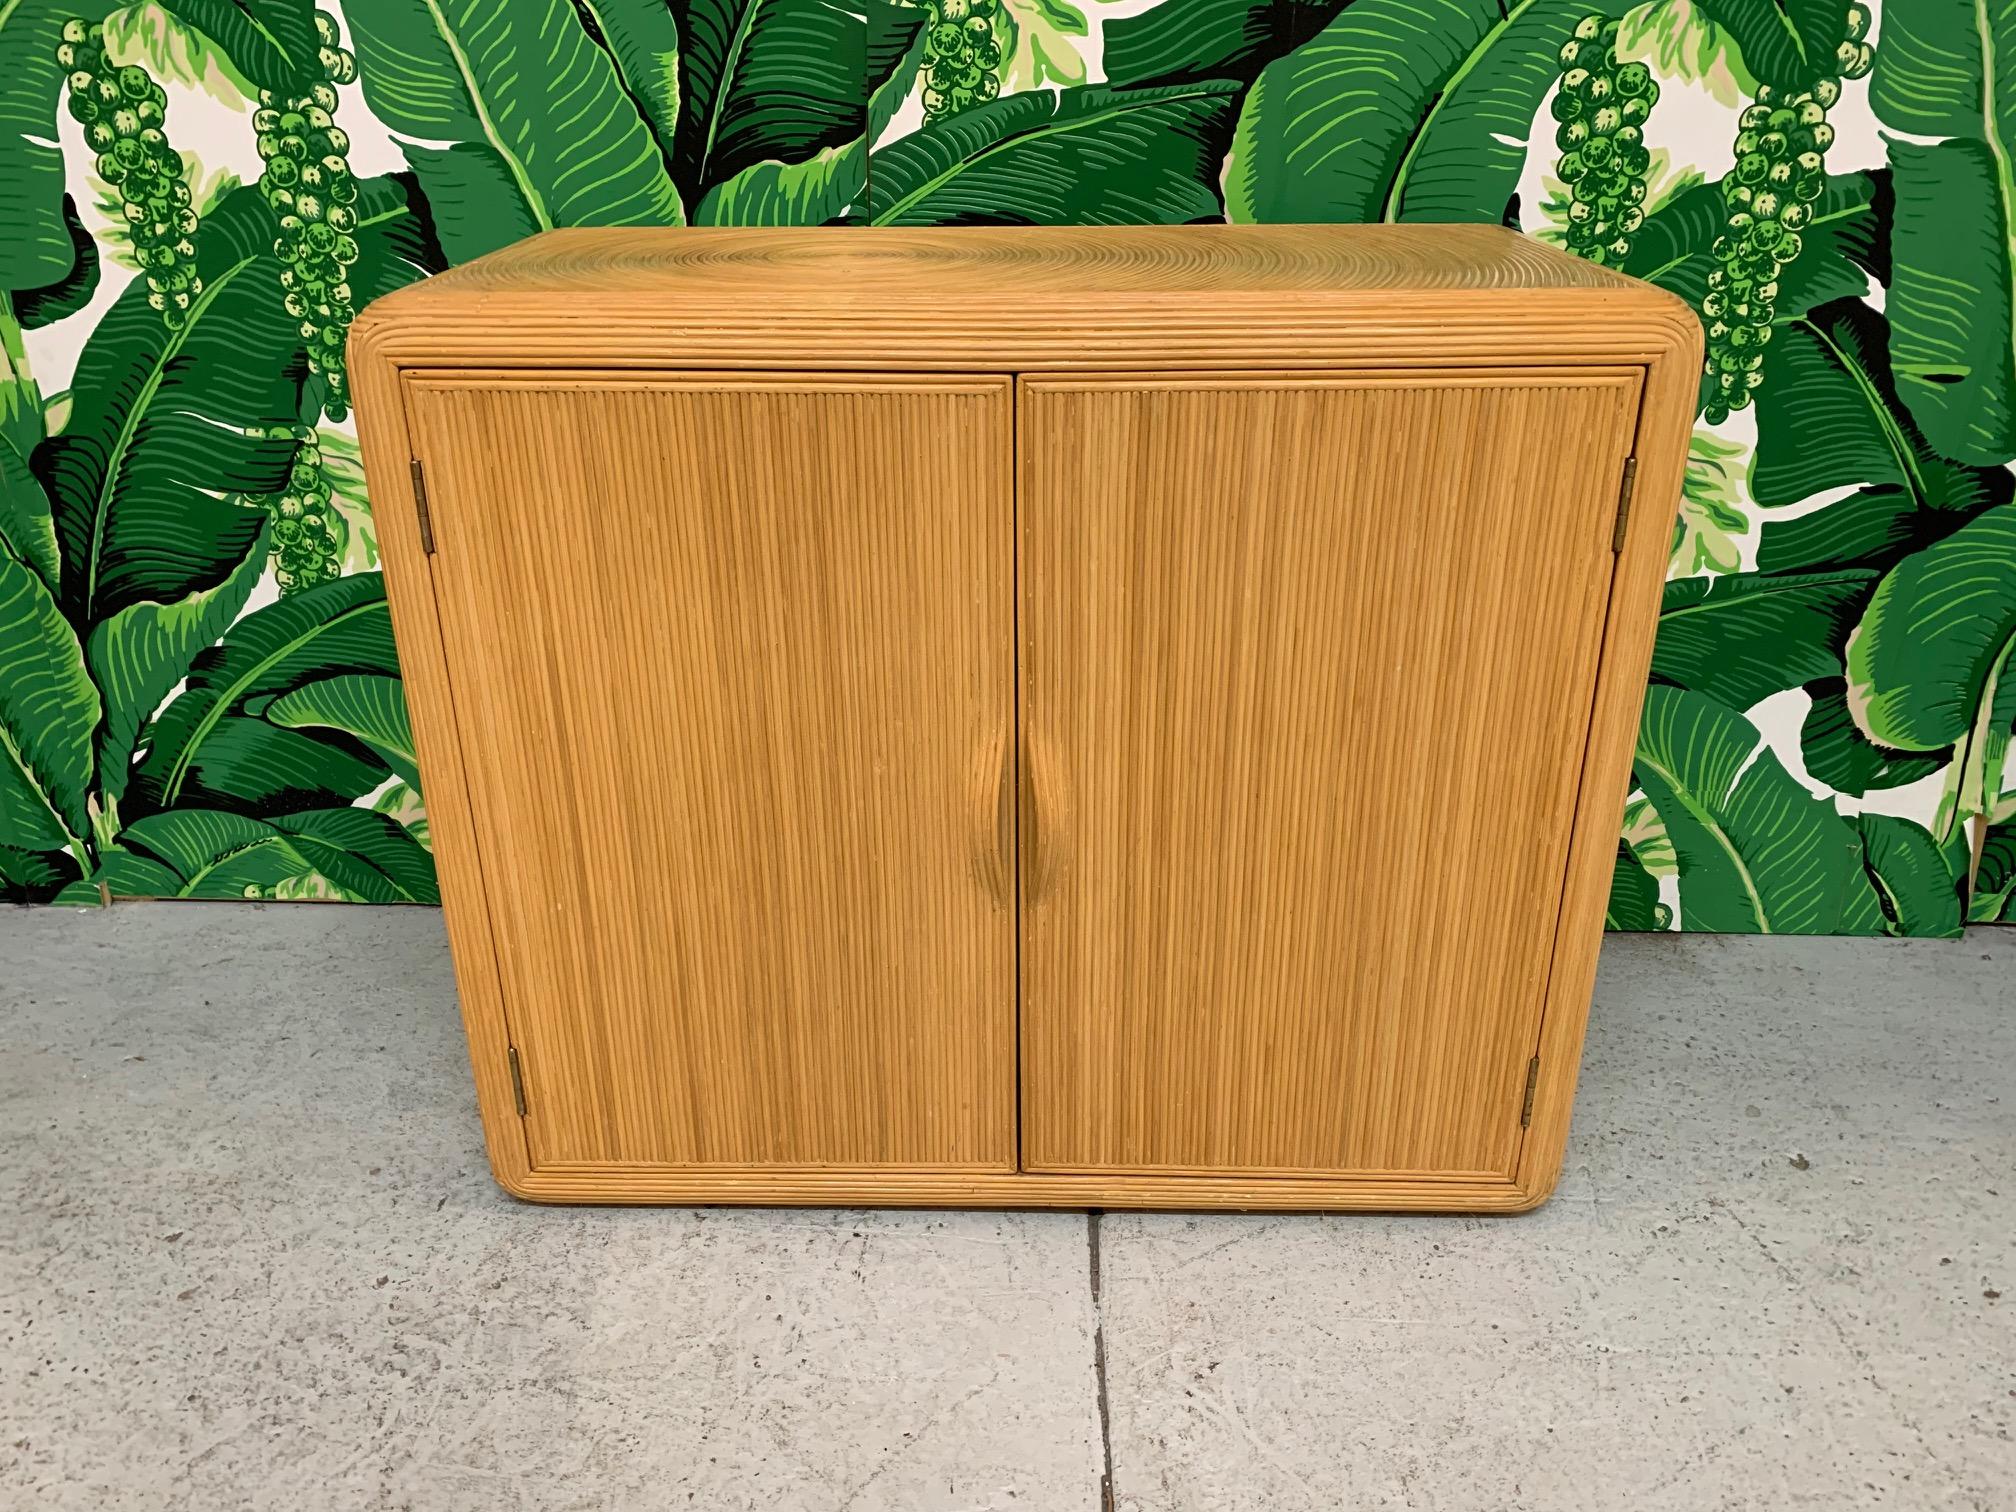 Double door storage cabinet features pencil reed design. Iconic sunburst design from intricate split reed rattan wrapped surfaces. Very good condition with minor imperfections consistent with age.